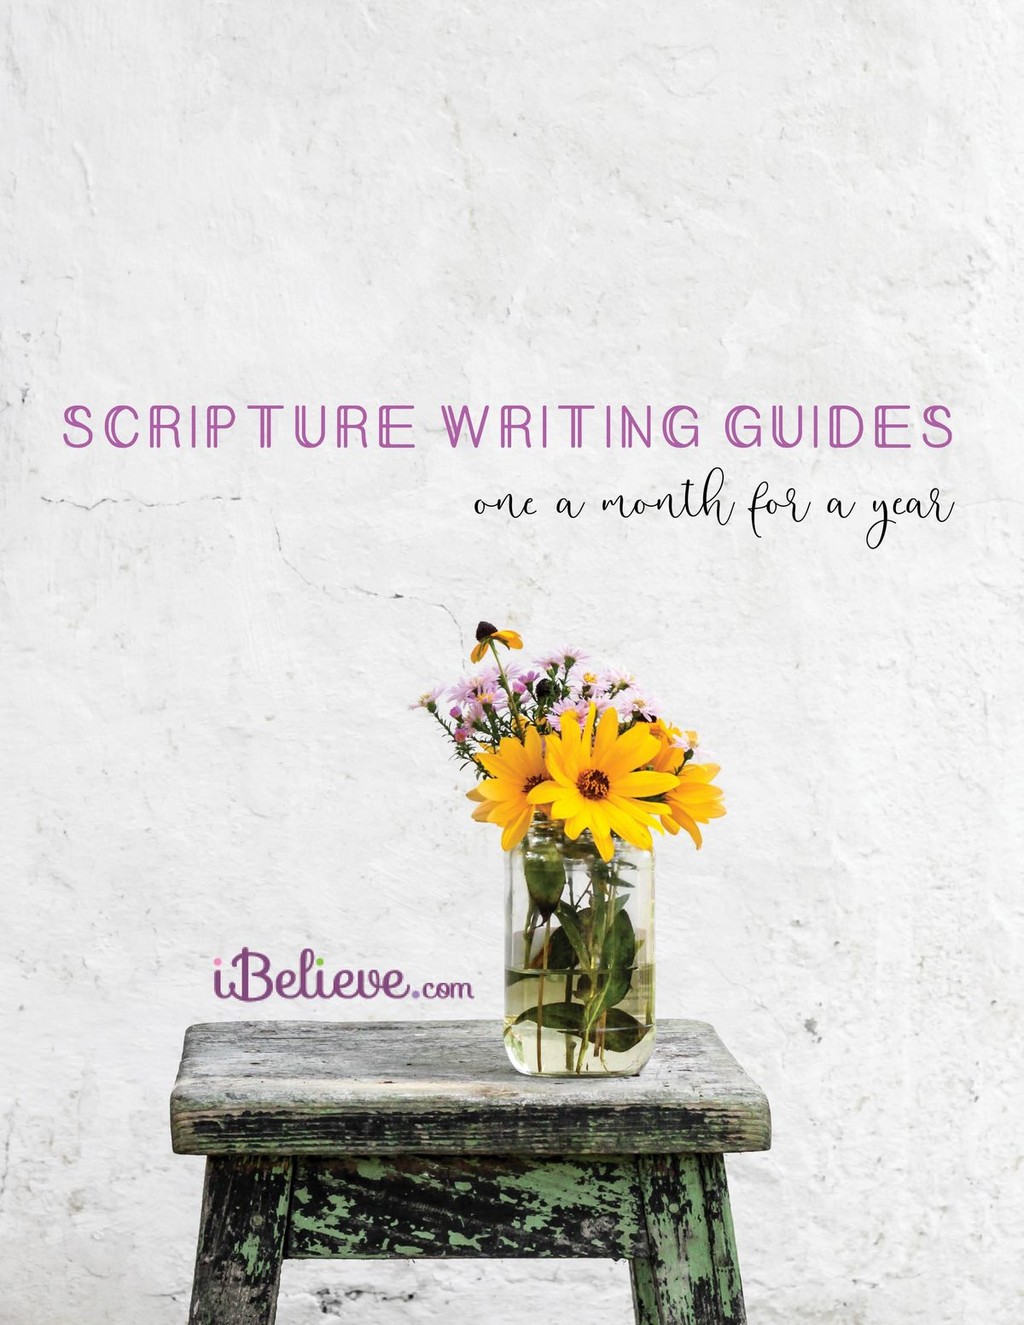 One Year of Scripture Writing Guides